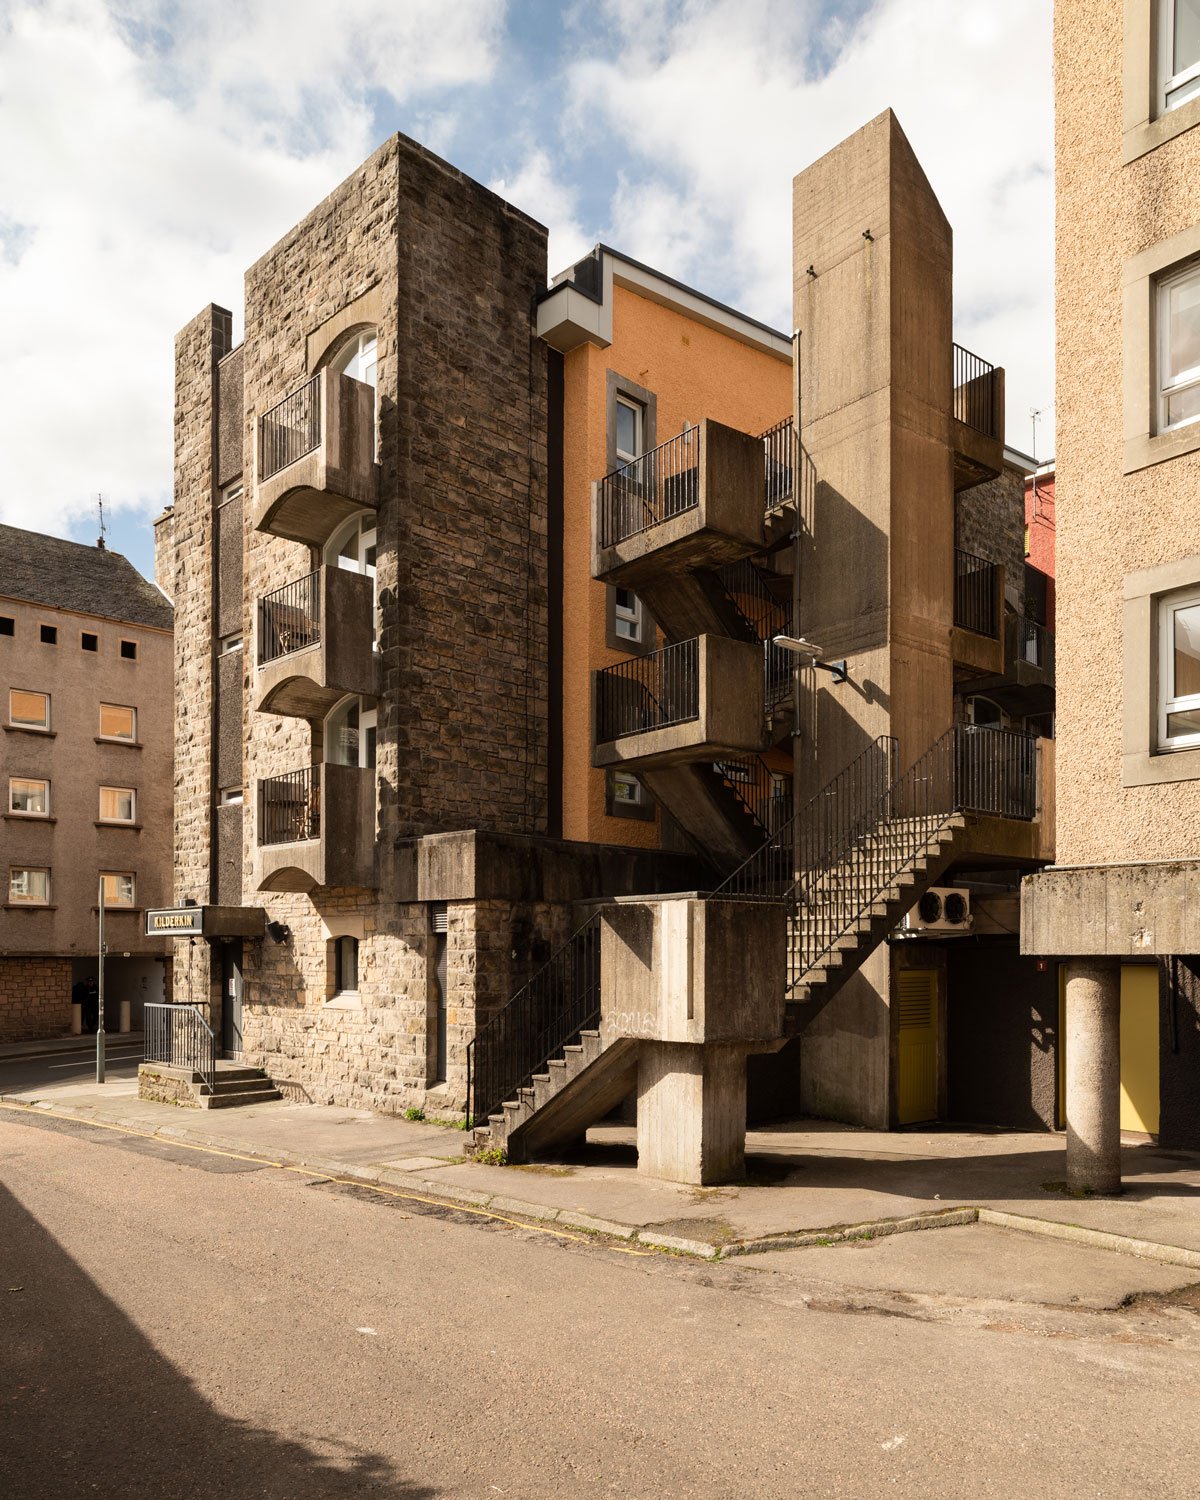 Glasgow-Institute-of-Architects-awards-2021-residential-large-Tom-Manley_Canongate2.jpg